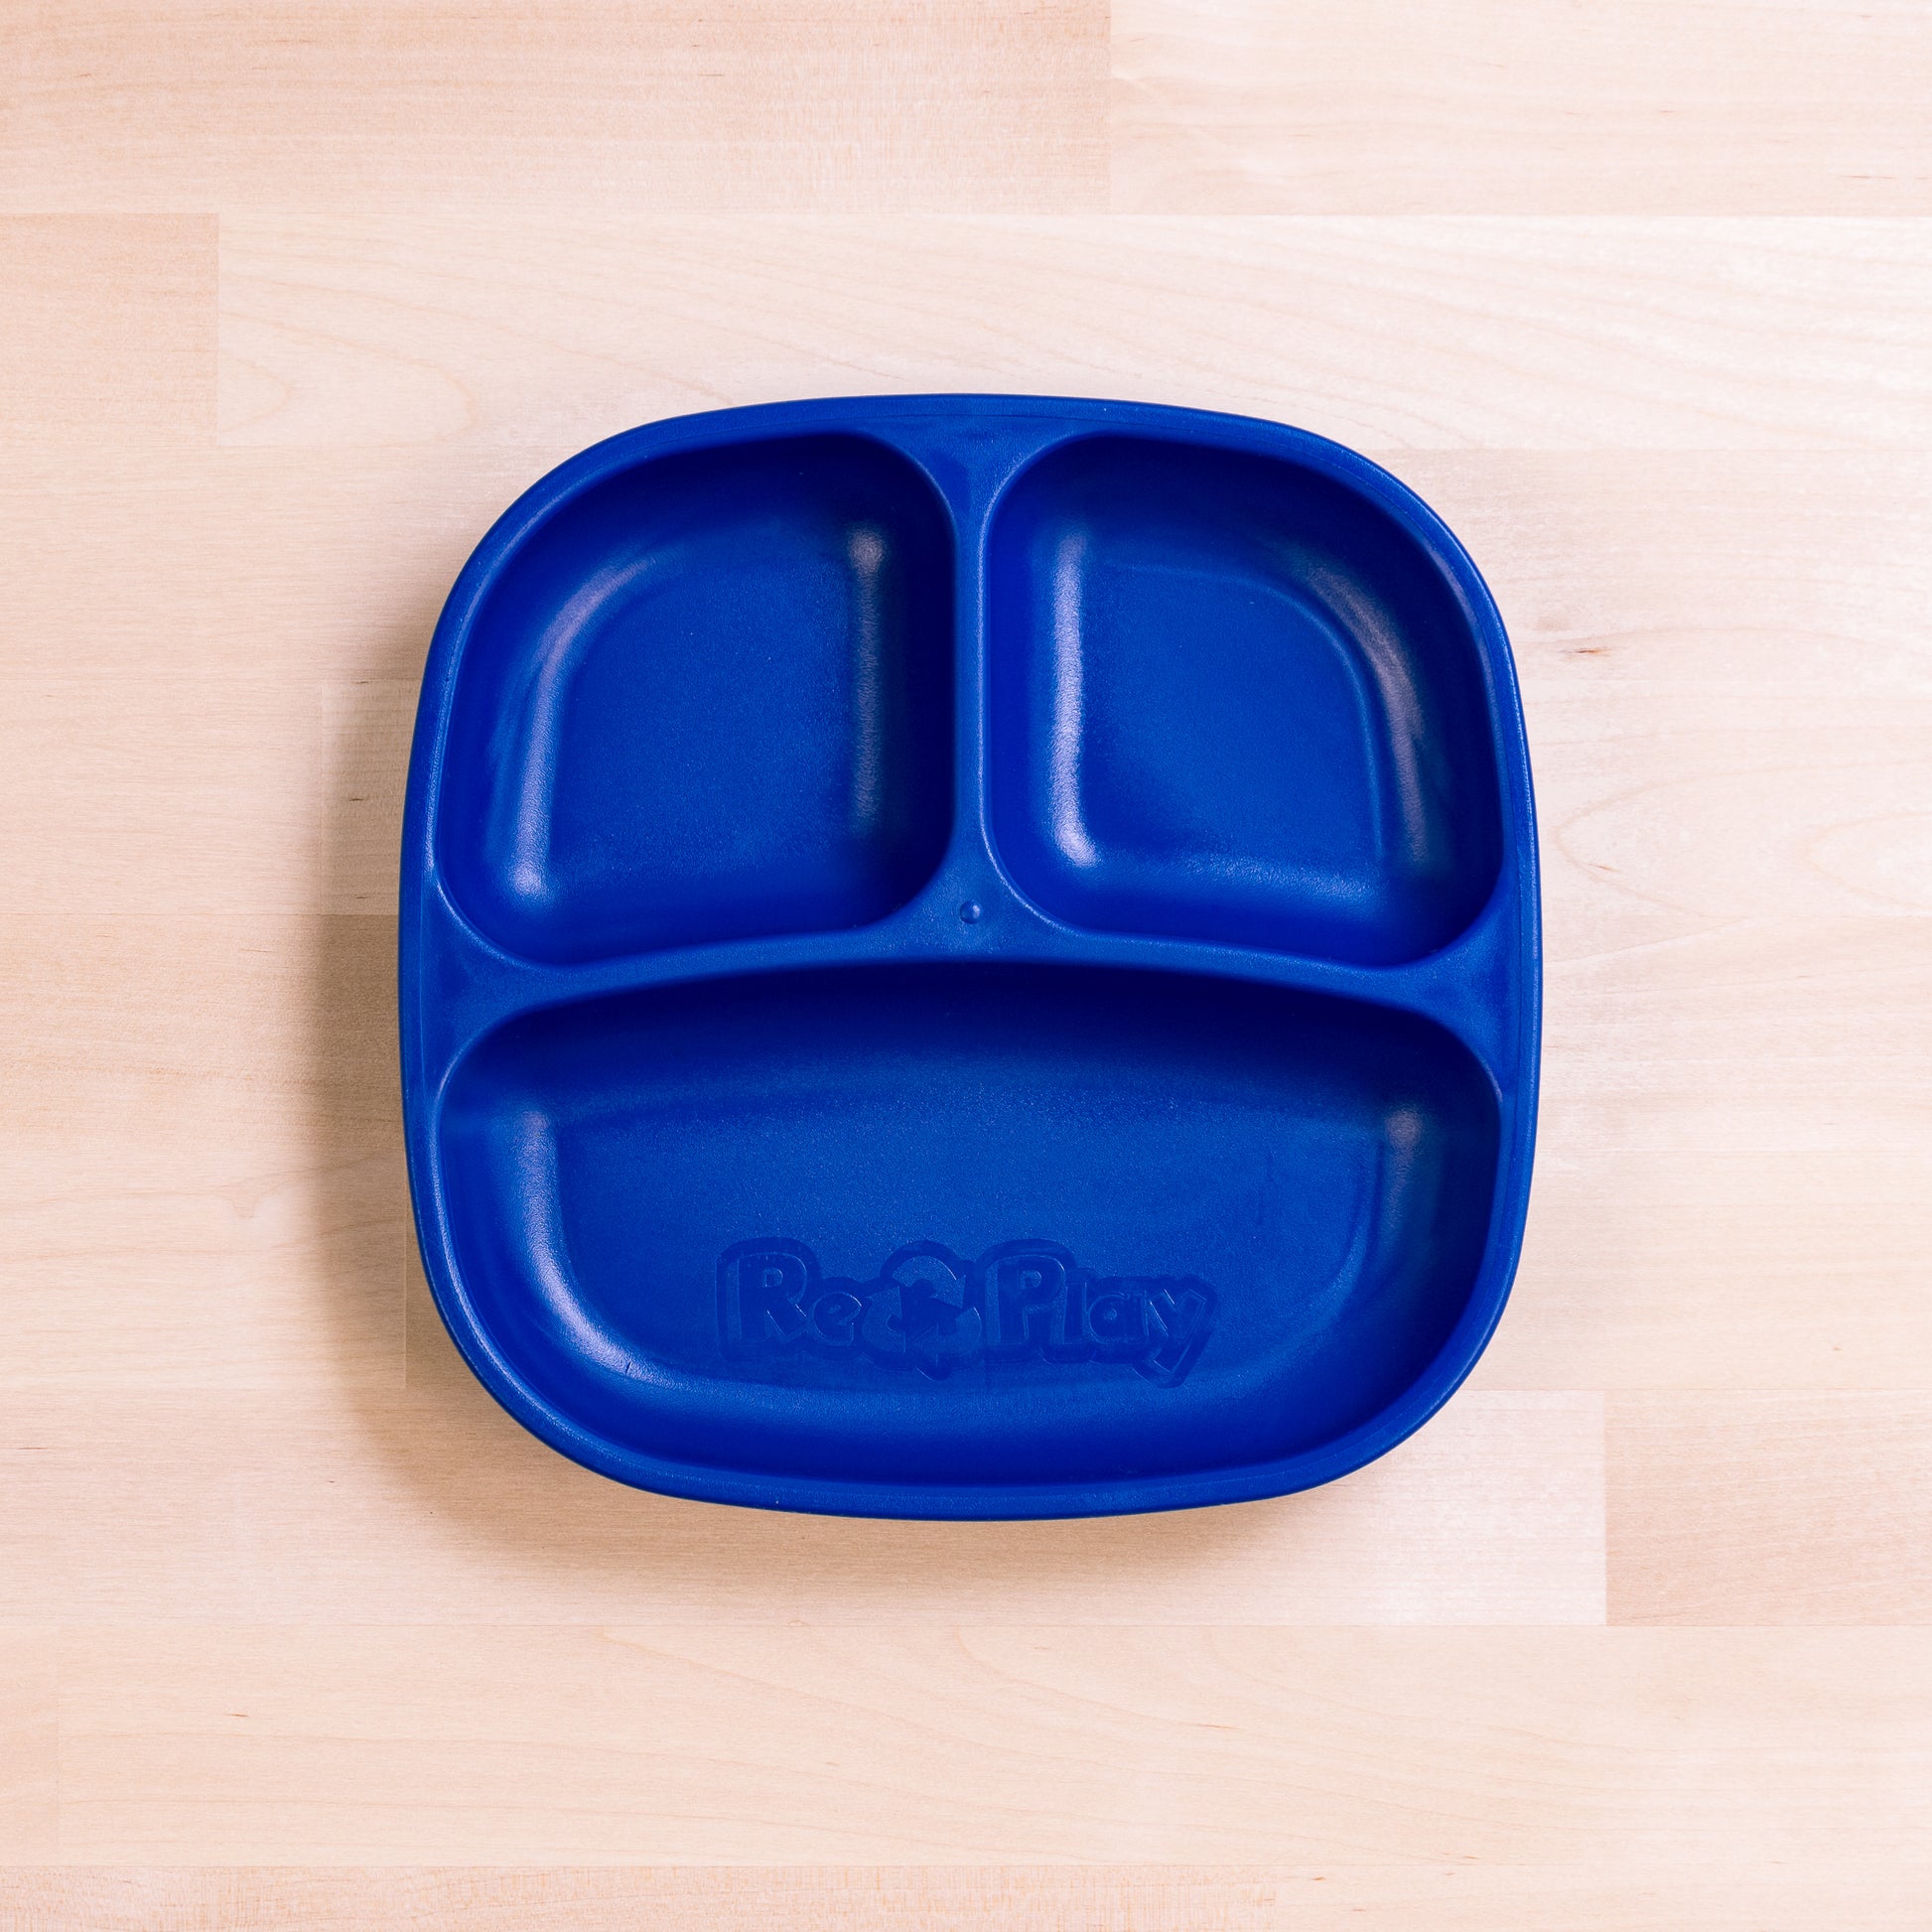 Re-Play Divided Plate 7" plate in Navy Blue from Bear & Moo